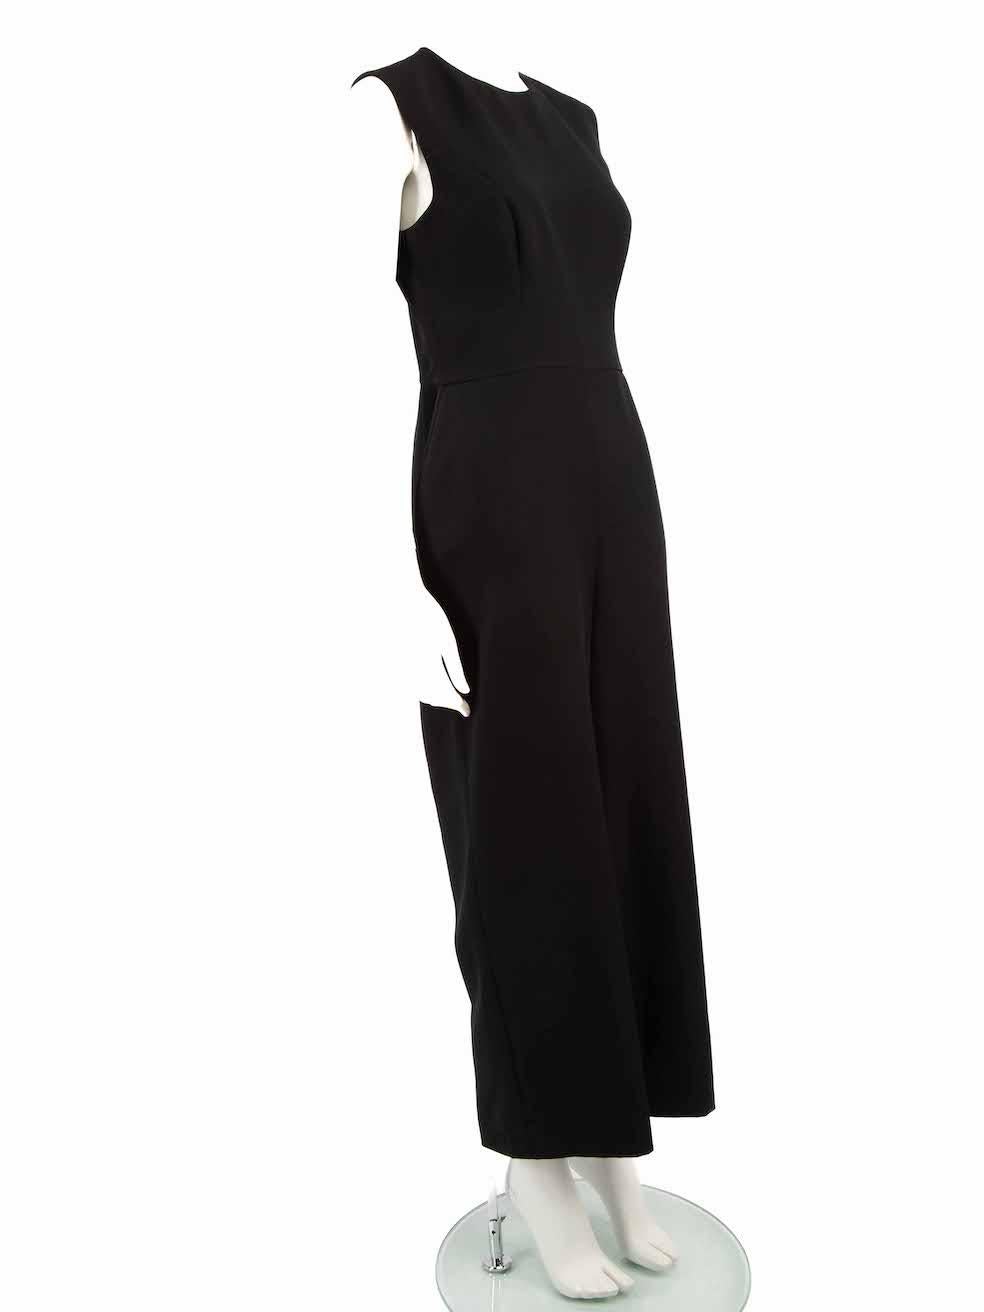 CONDITION is Very good. Hardly any visible wear to jumpsuit is evident on this used Honayda designer resale item.
 
 
 
 Details
 
 
 Black
 
 Synthetic
 
 Jumpsuit
 
 Sleeveless
 
 Wide leg
 
 Round neck
 
 Back zip and hook fastening
 
 
 
 
 
